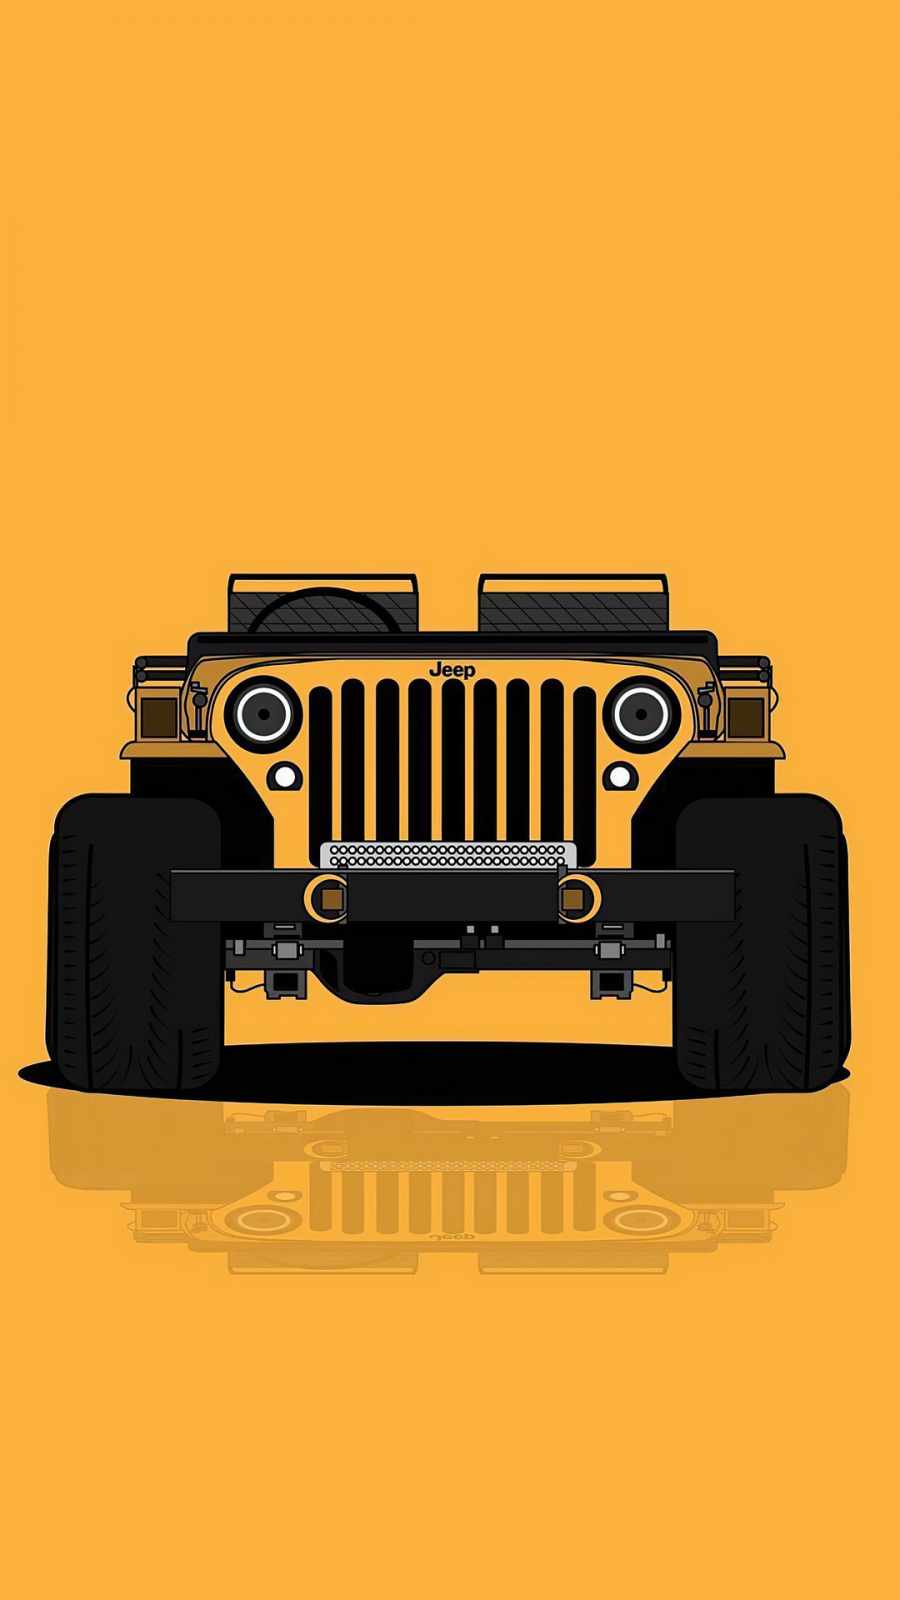 Download Free 100 + jeep logo Wallpapers